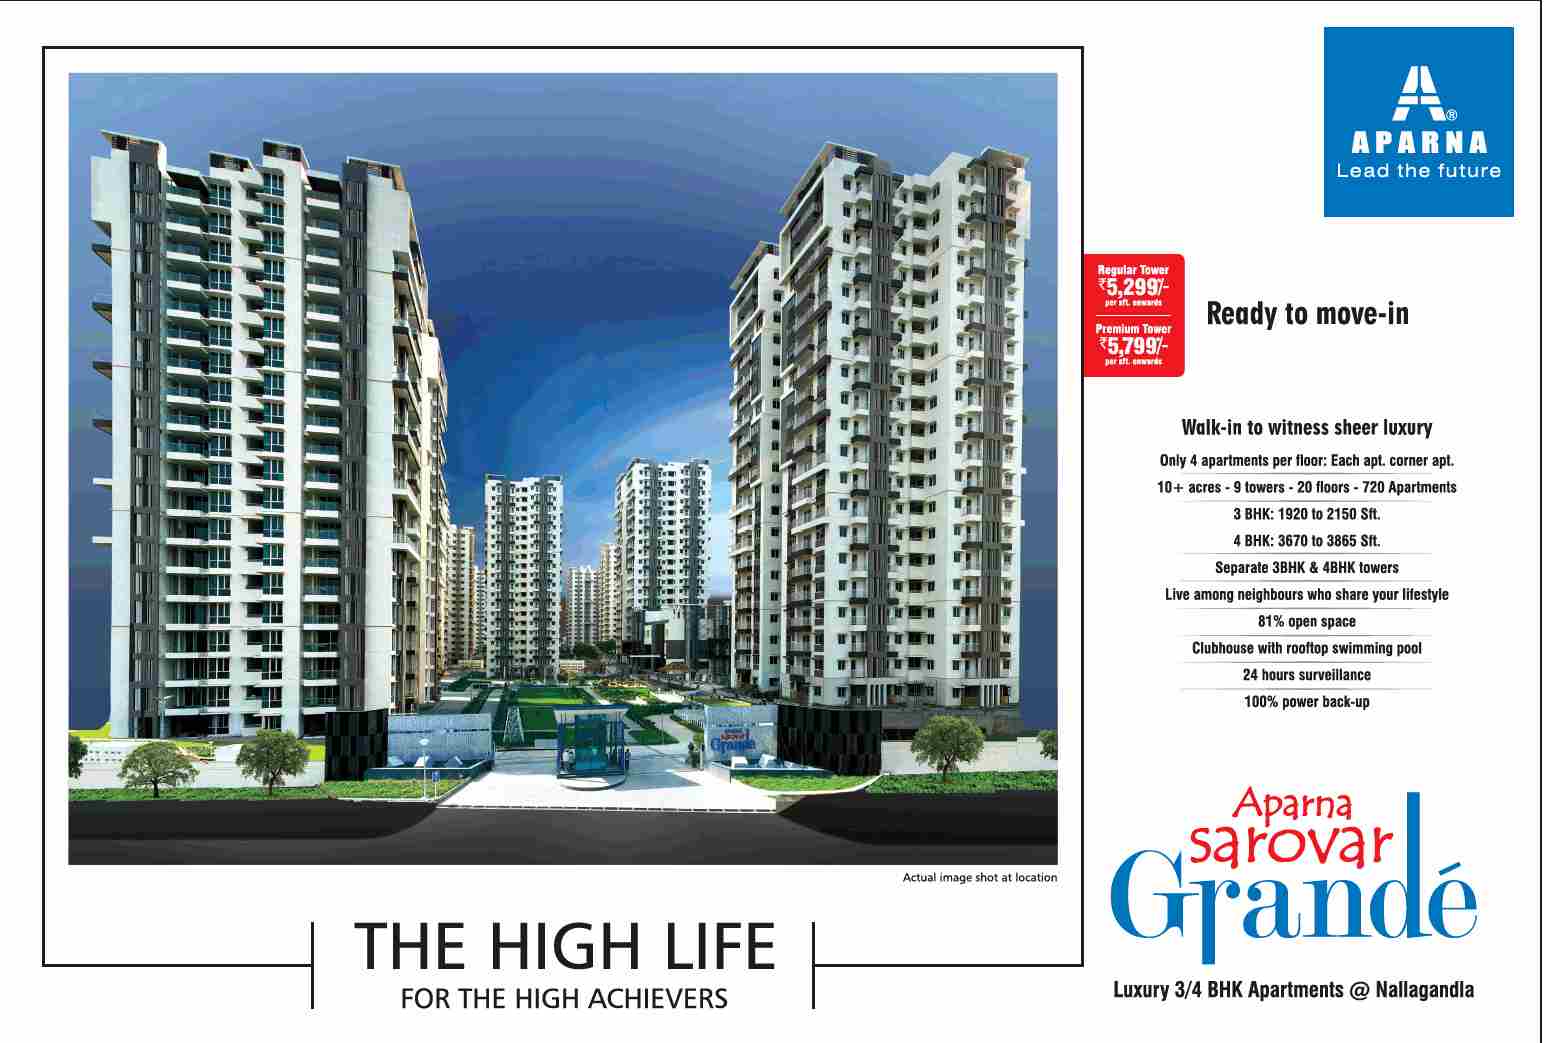 Aparna Sarovar Grande - The high life for the high achievers in Hyderabad Update